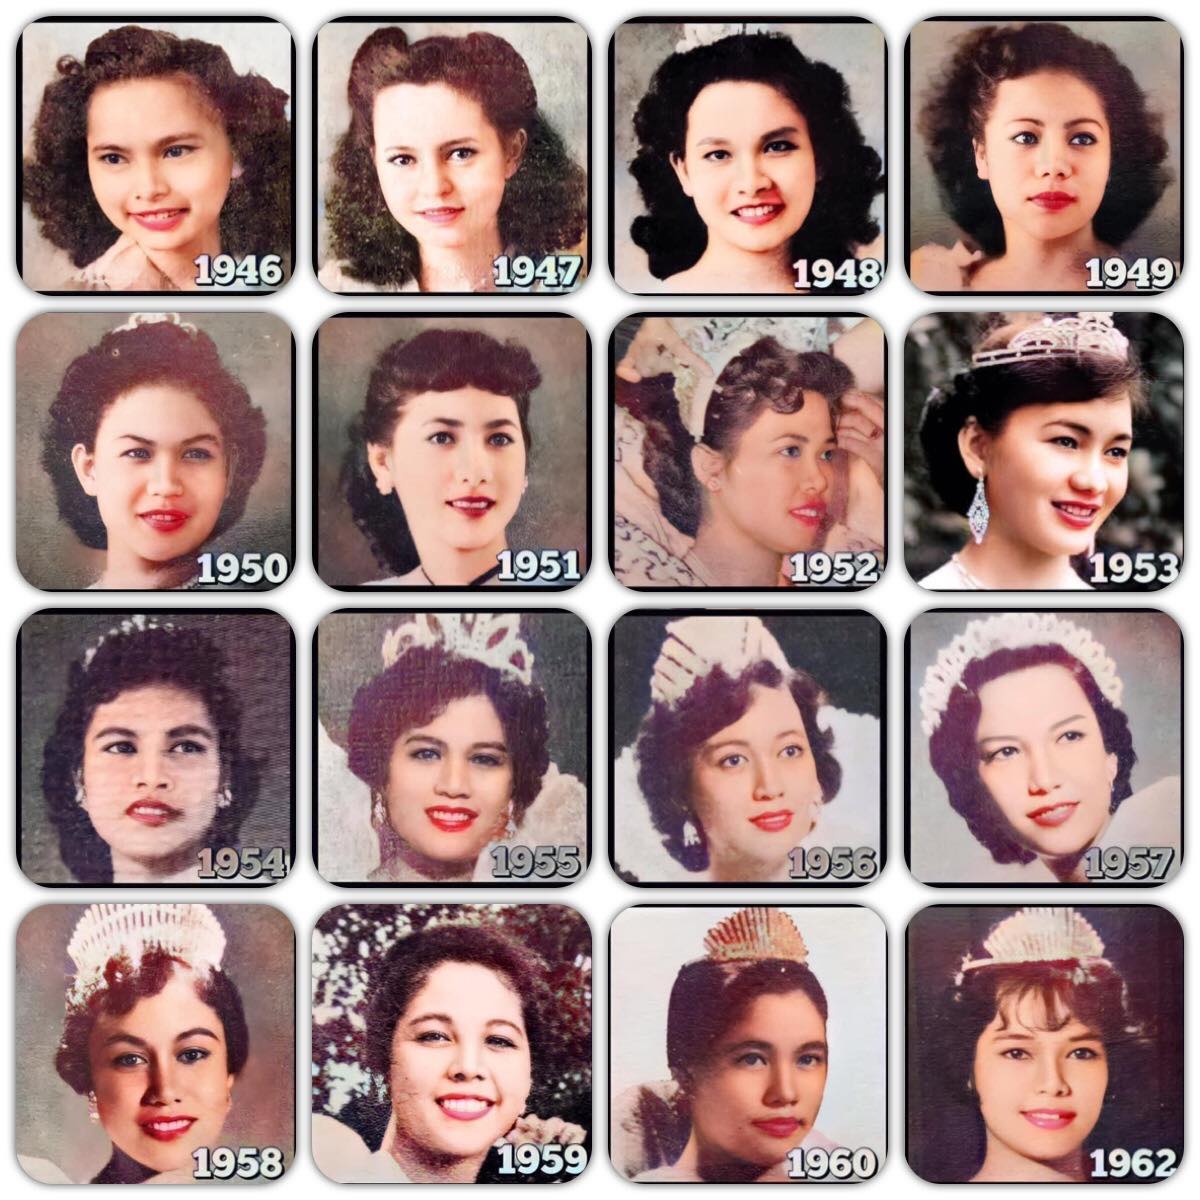 The History of the Miss Silliman pageant: Celebrating 75 years of Miss Silliman